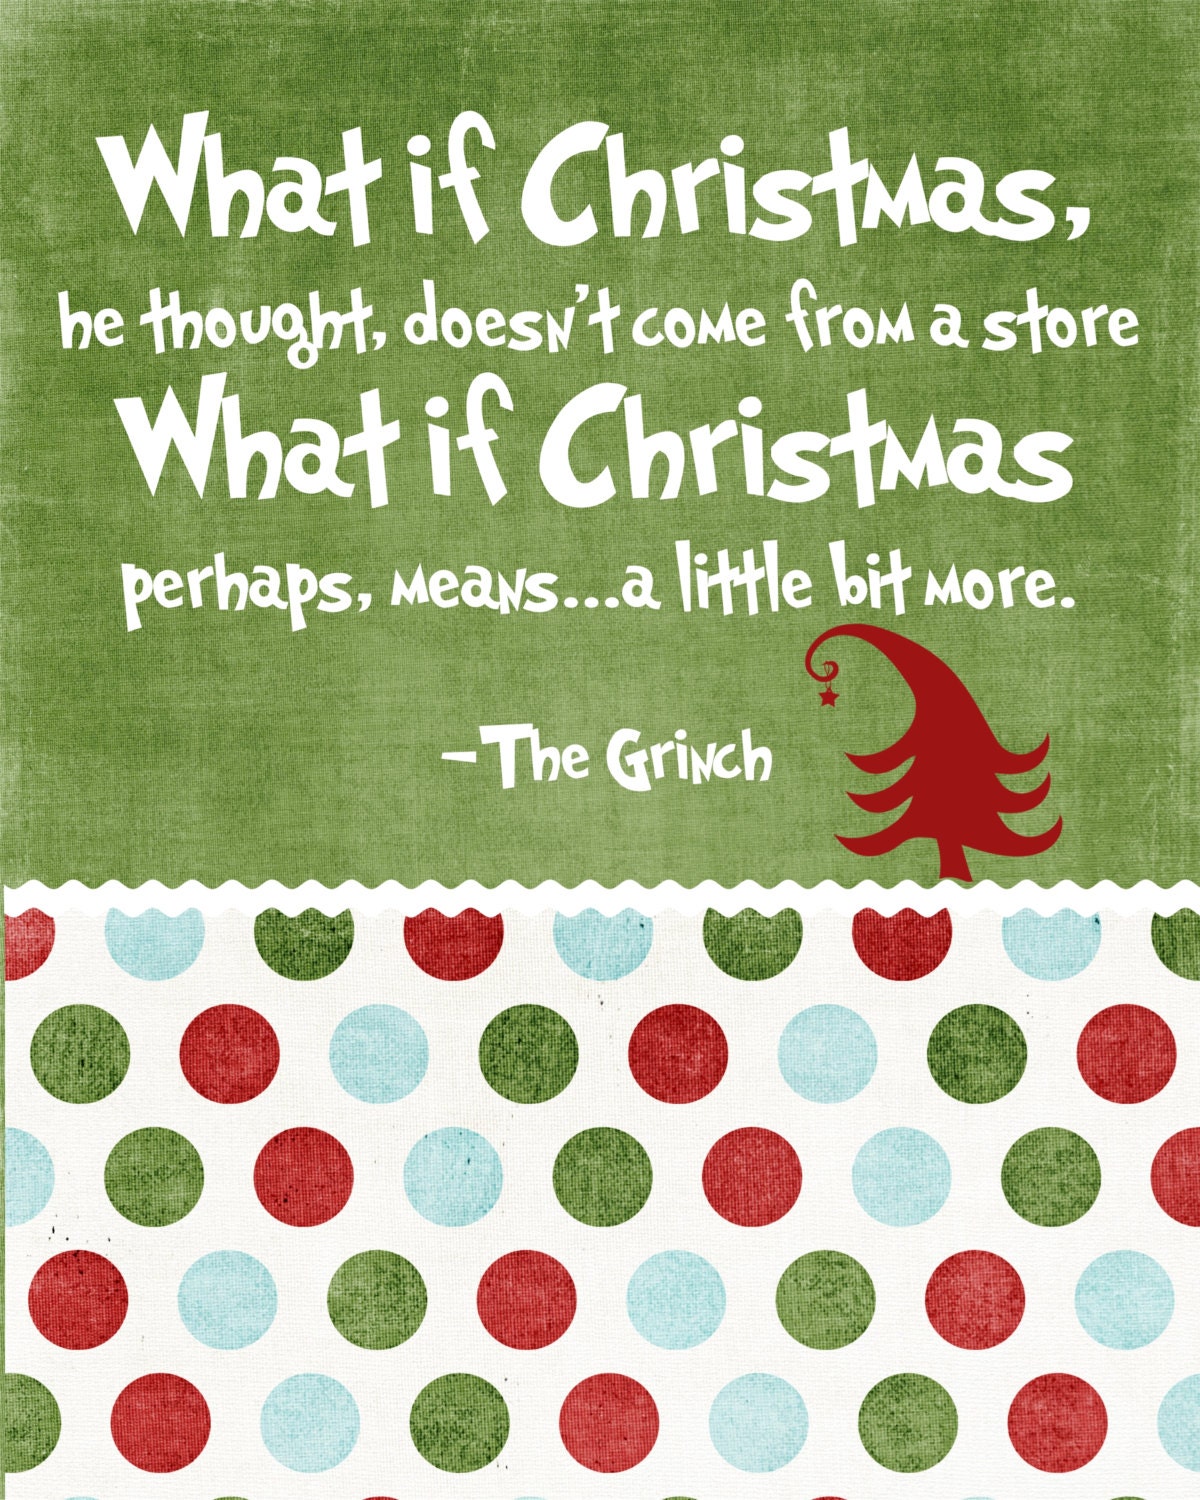 How the Grinch Stole Christmas printable. by JensPrintsAndMore